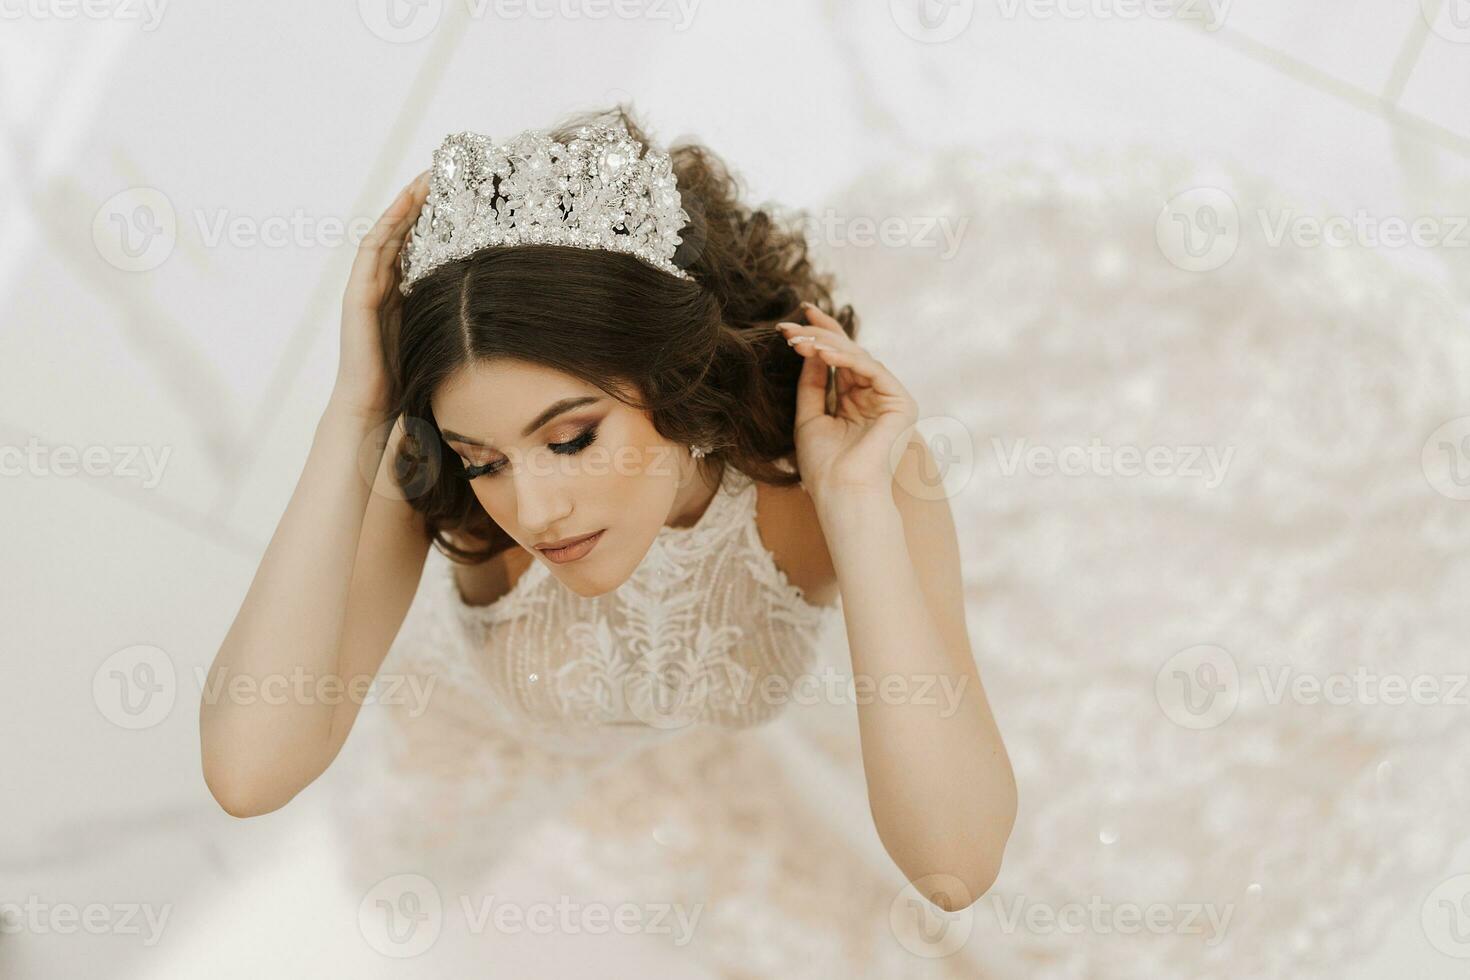 Top view, beautiful bride, with a white wedding dress and a luxurious crown on her head. Horizontal photo